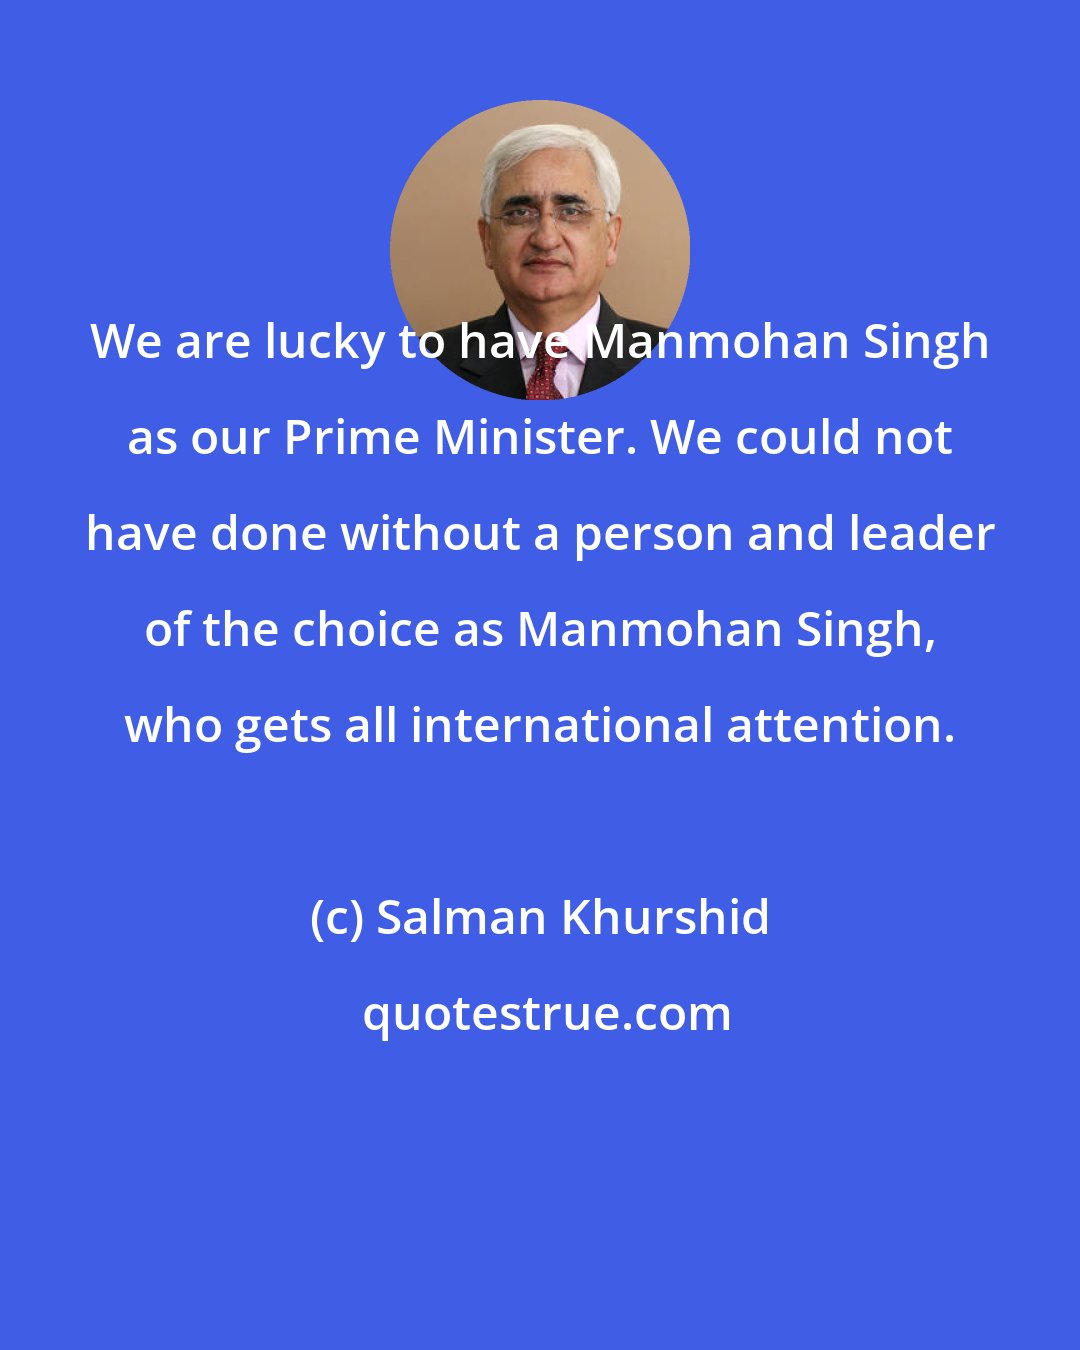 Salman Khurshid: We are lucky to have Manmohan Singh as our Prime Minister. We could not have done without a person and leader of the choice as Manmohan Singh, who gets all international attention.